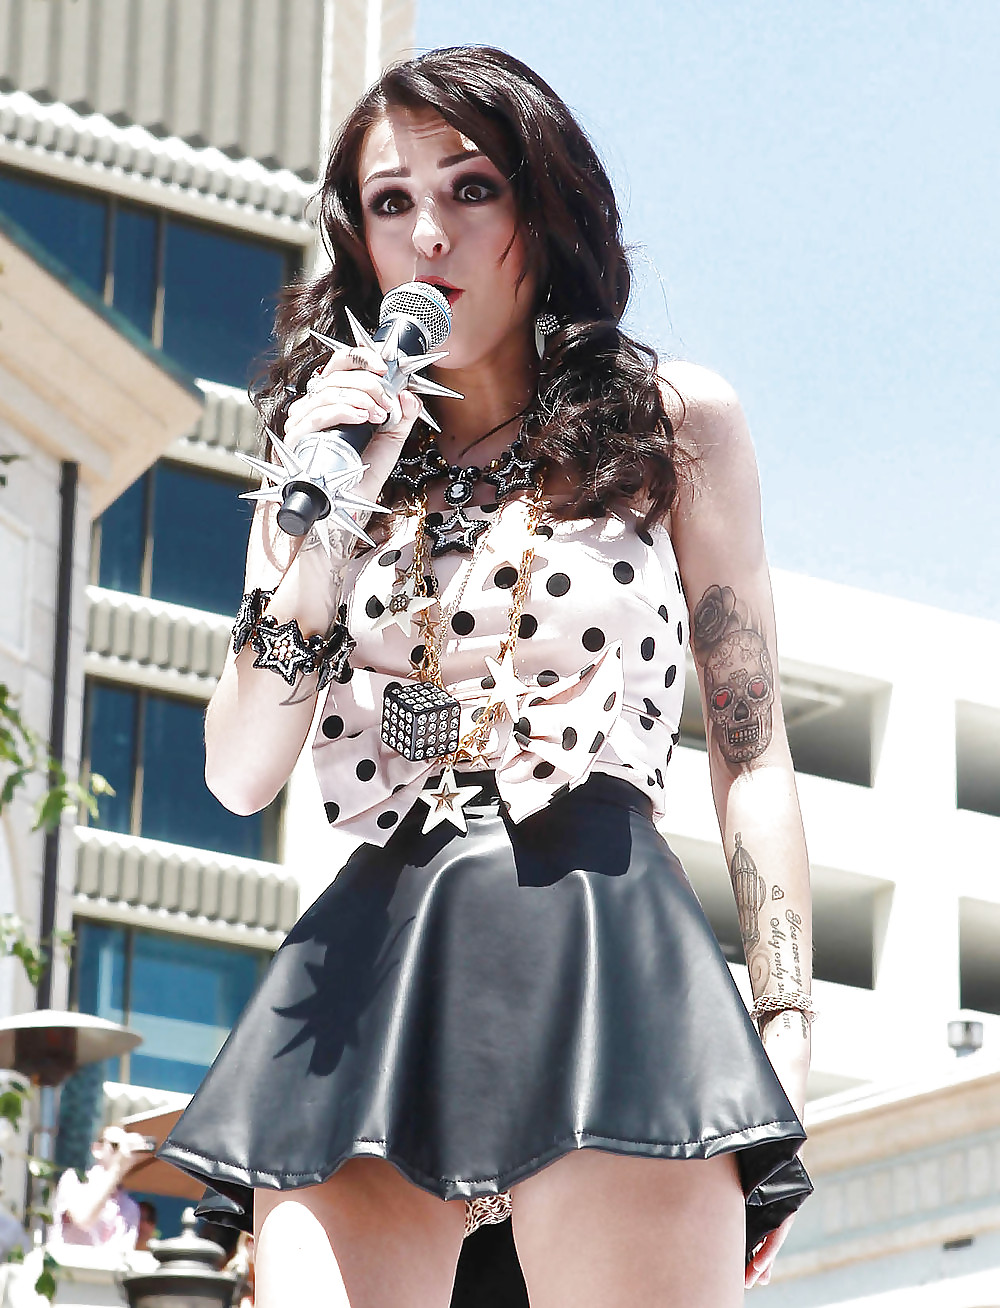 Fhm uk top 100 number 52 cher lloyd
 #22167270